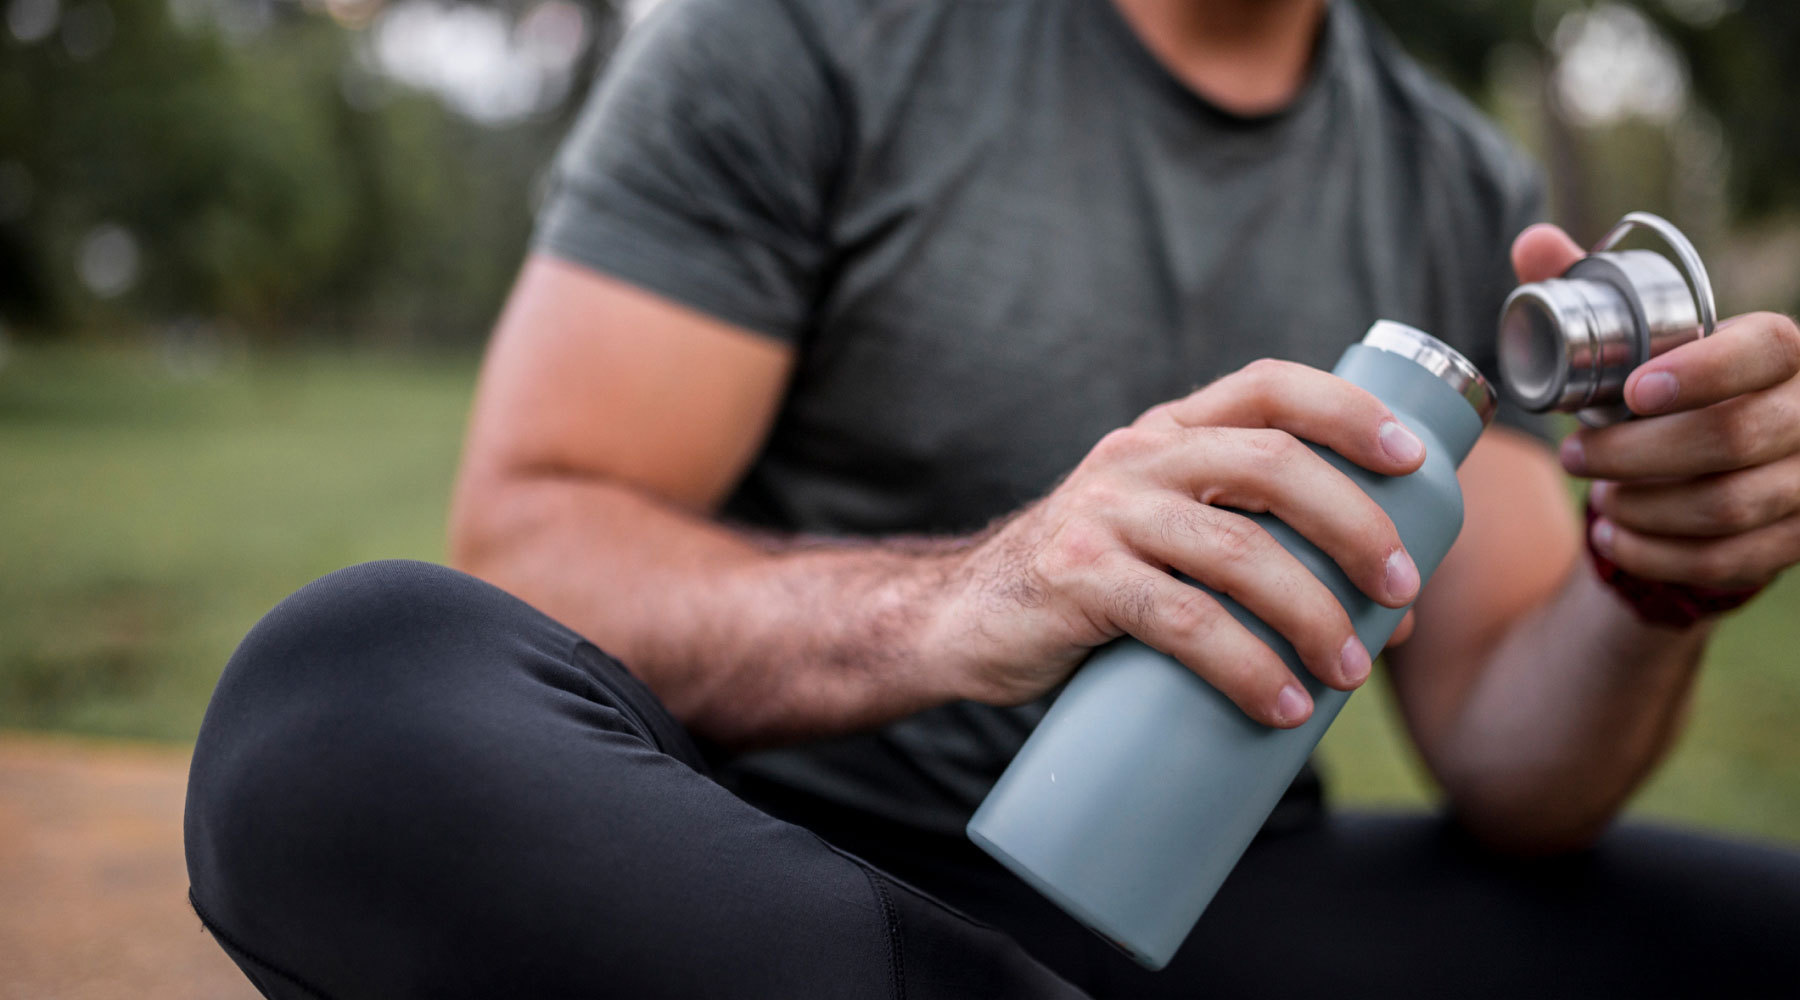 Man with water bottle, depicting the importance of hydration during exercise.